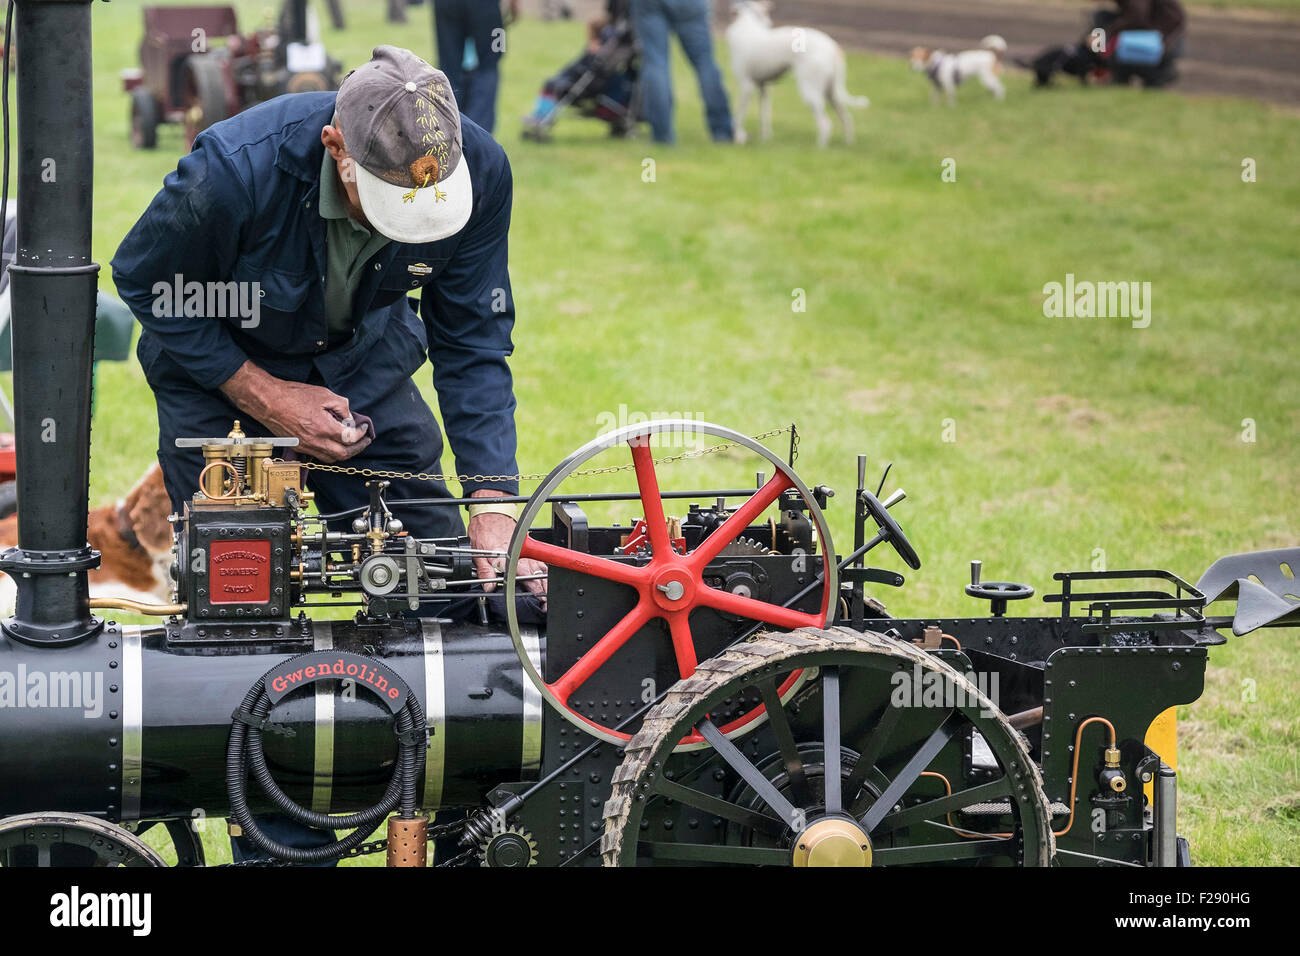 A man carrying out maintenance on his model steam engine at the Essex Country Show, Barleylands, Essex. Stock Photo